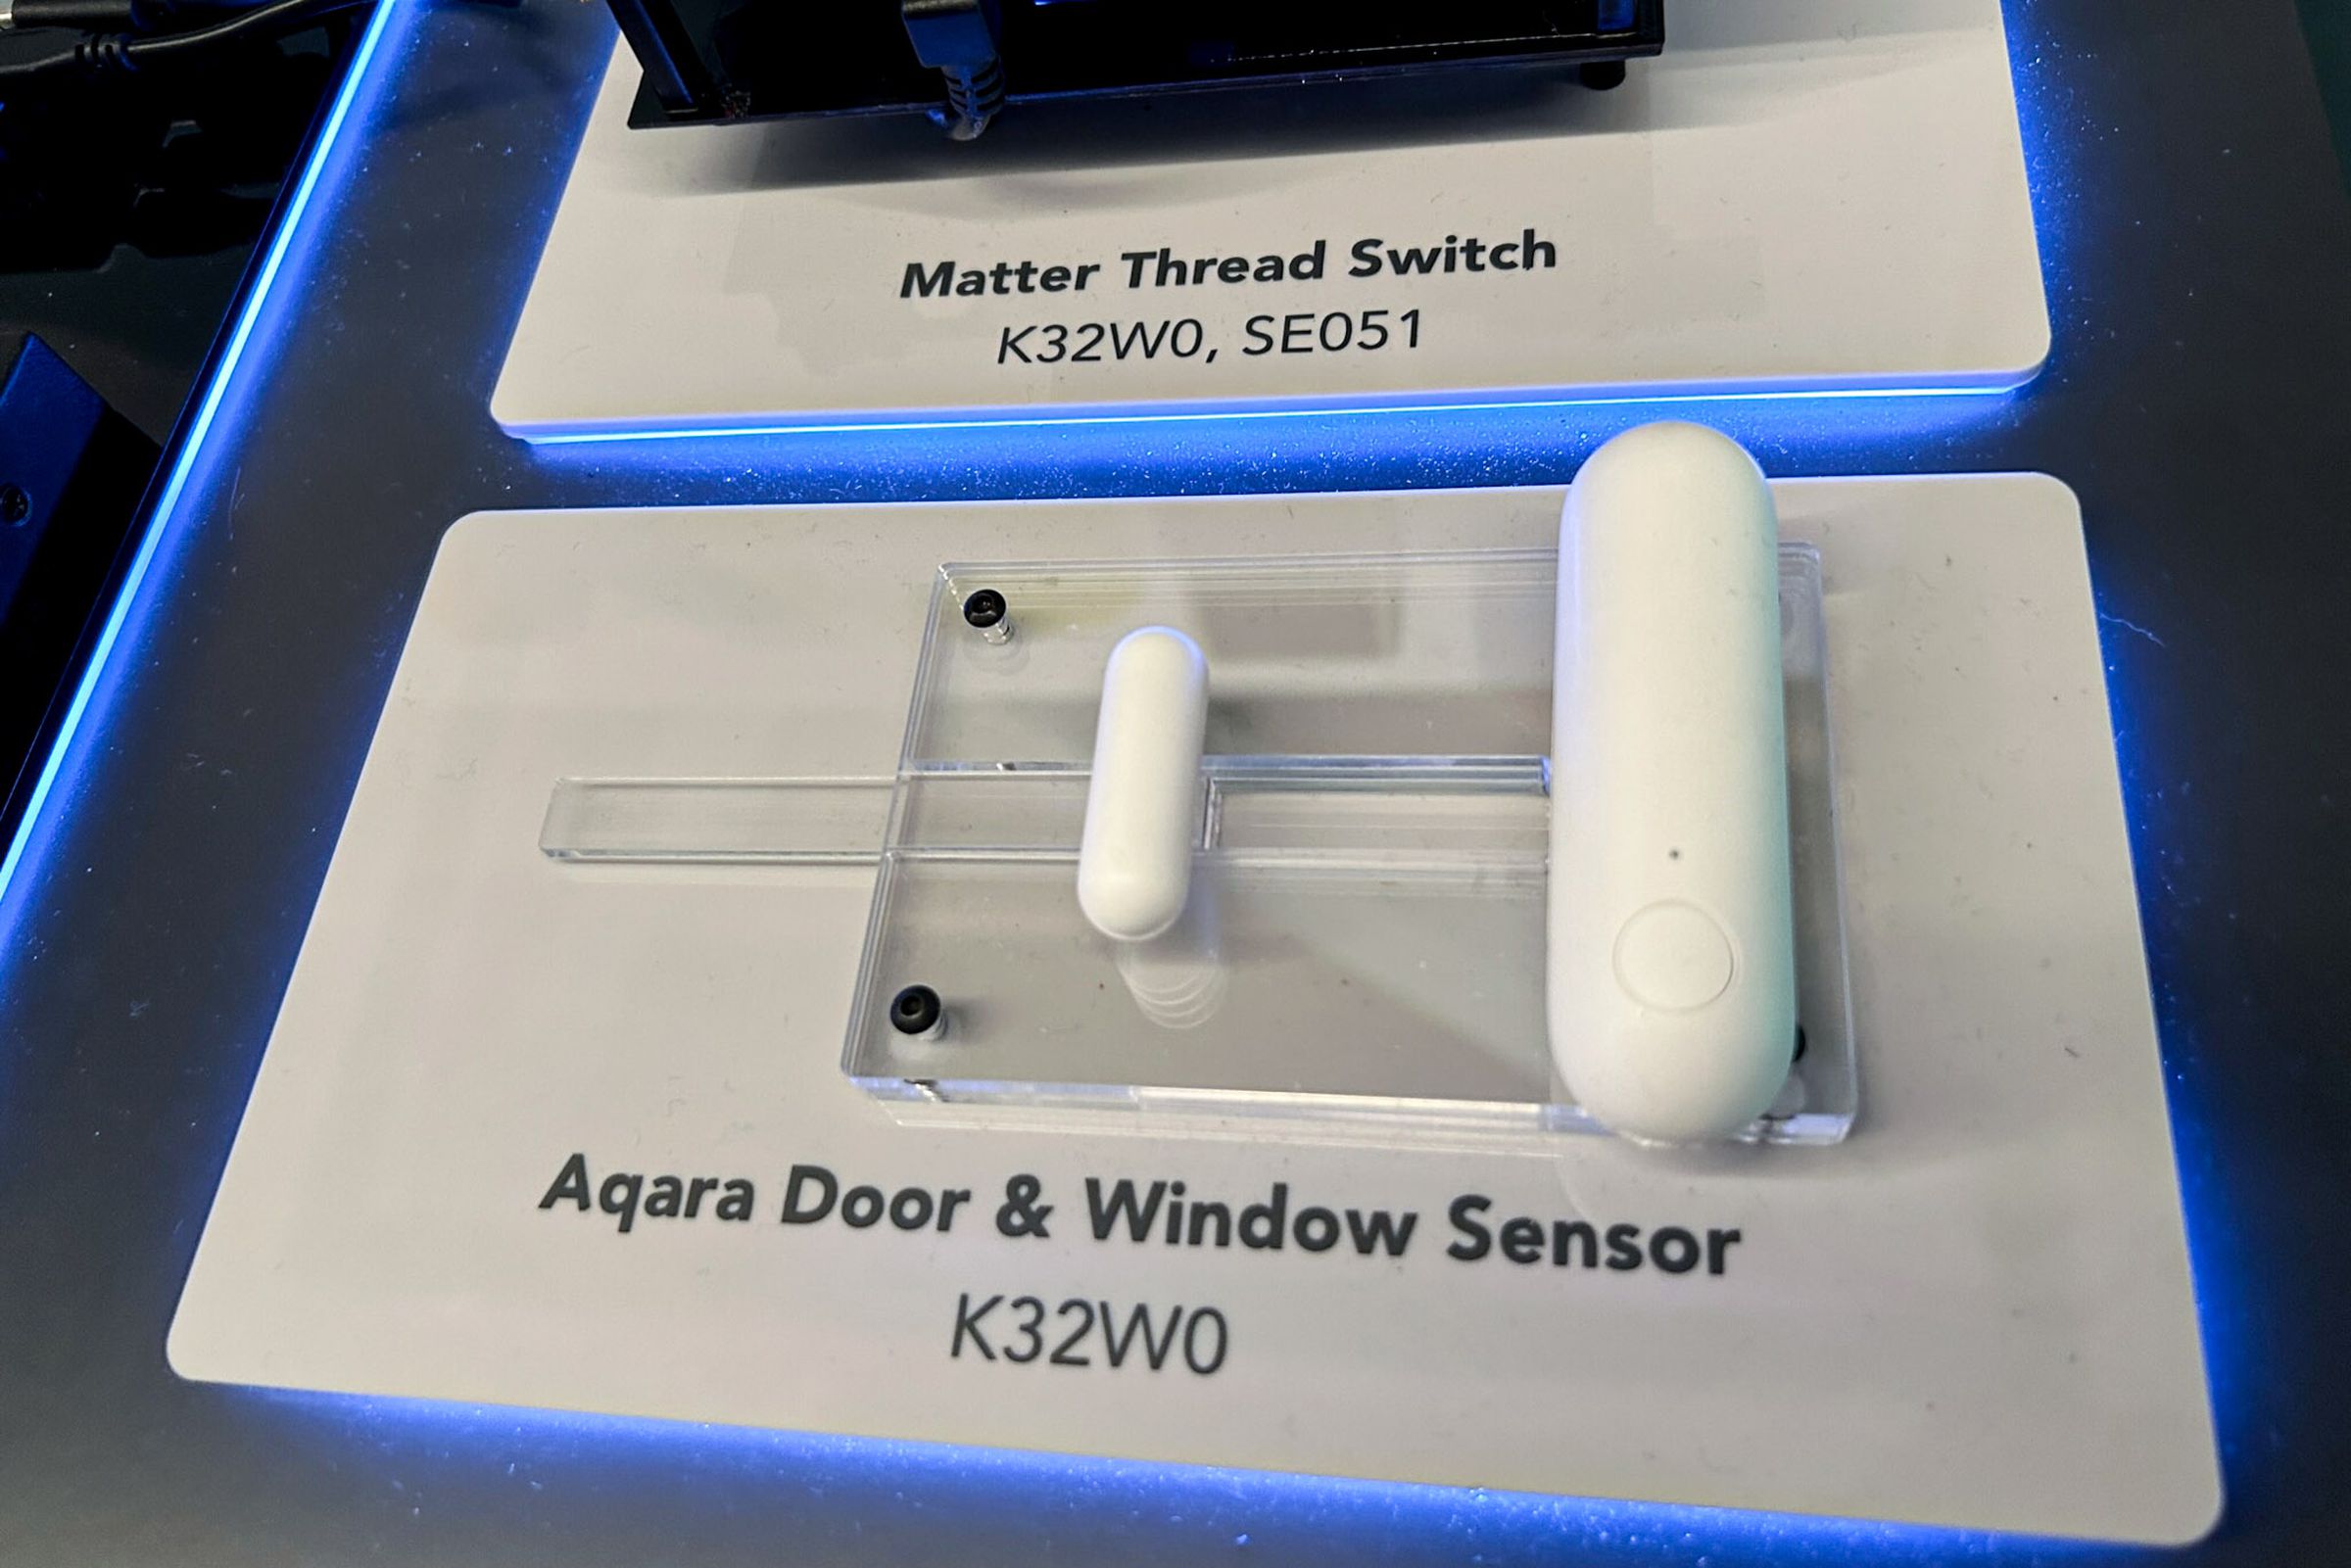 A prototype of the new Thread-based Aqara P2 Door & Window Sensor was part of an NXP demo at the Matter event. 